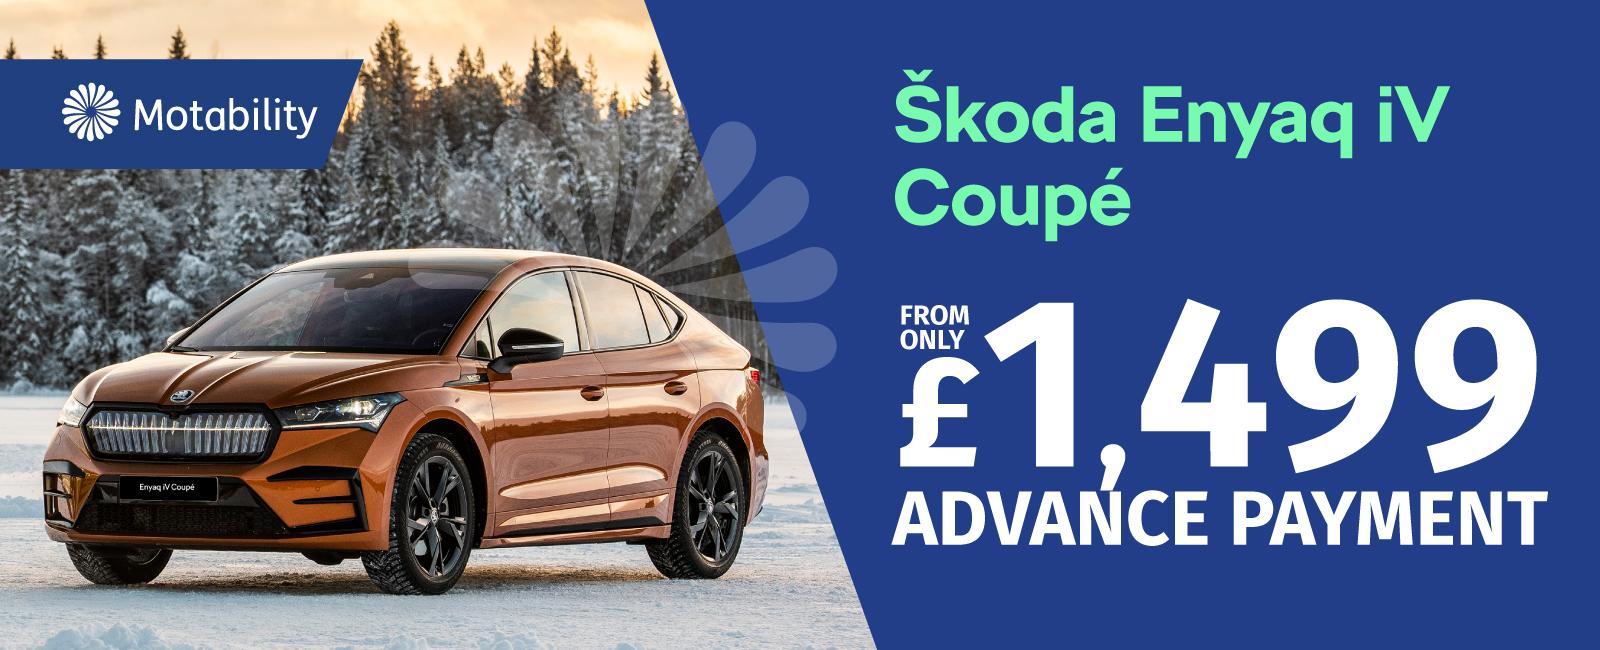 The Skoda Enyaq Coupe from £1,499 advance payment on the Motability Scheme